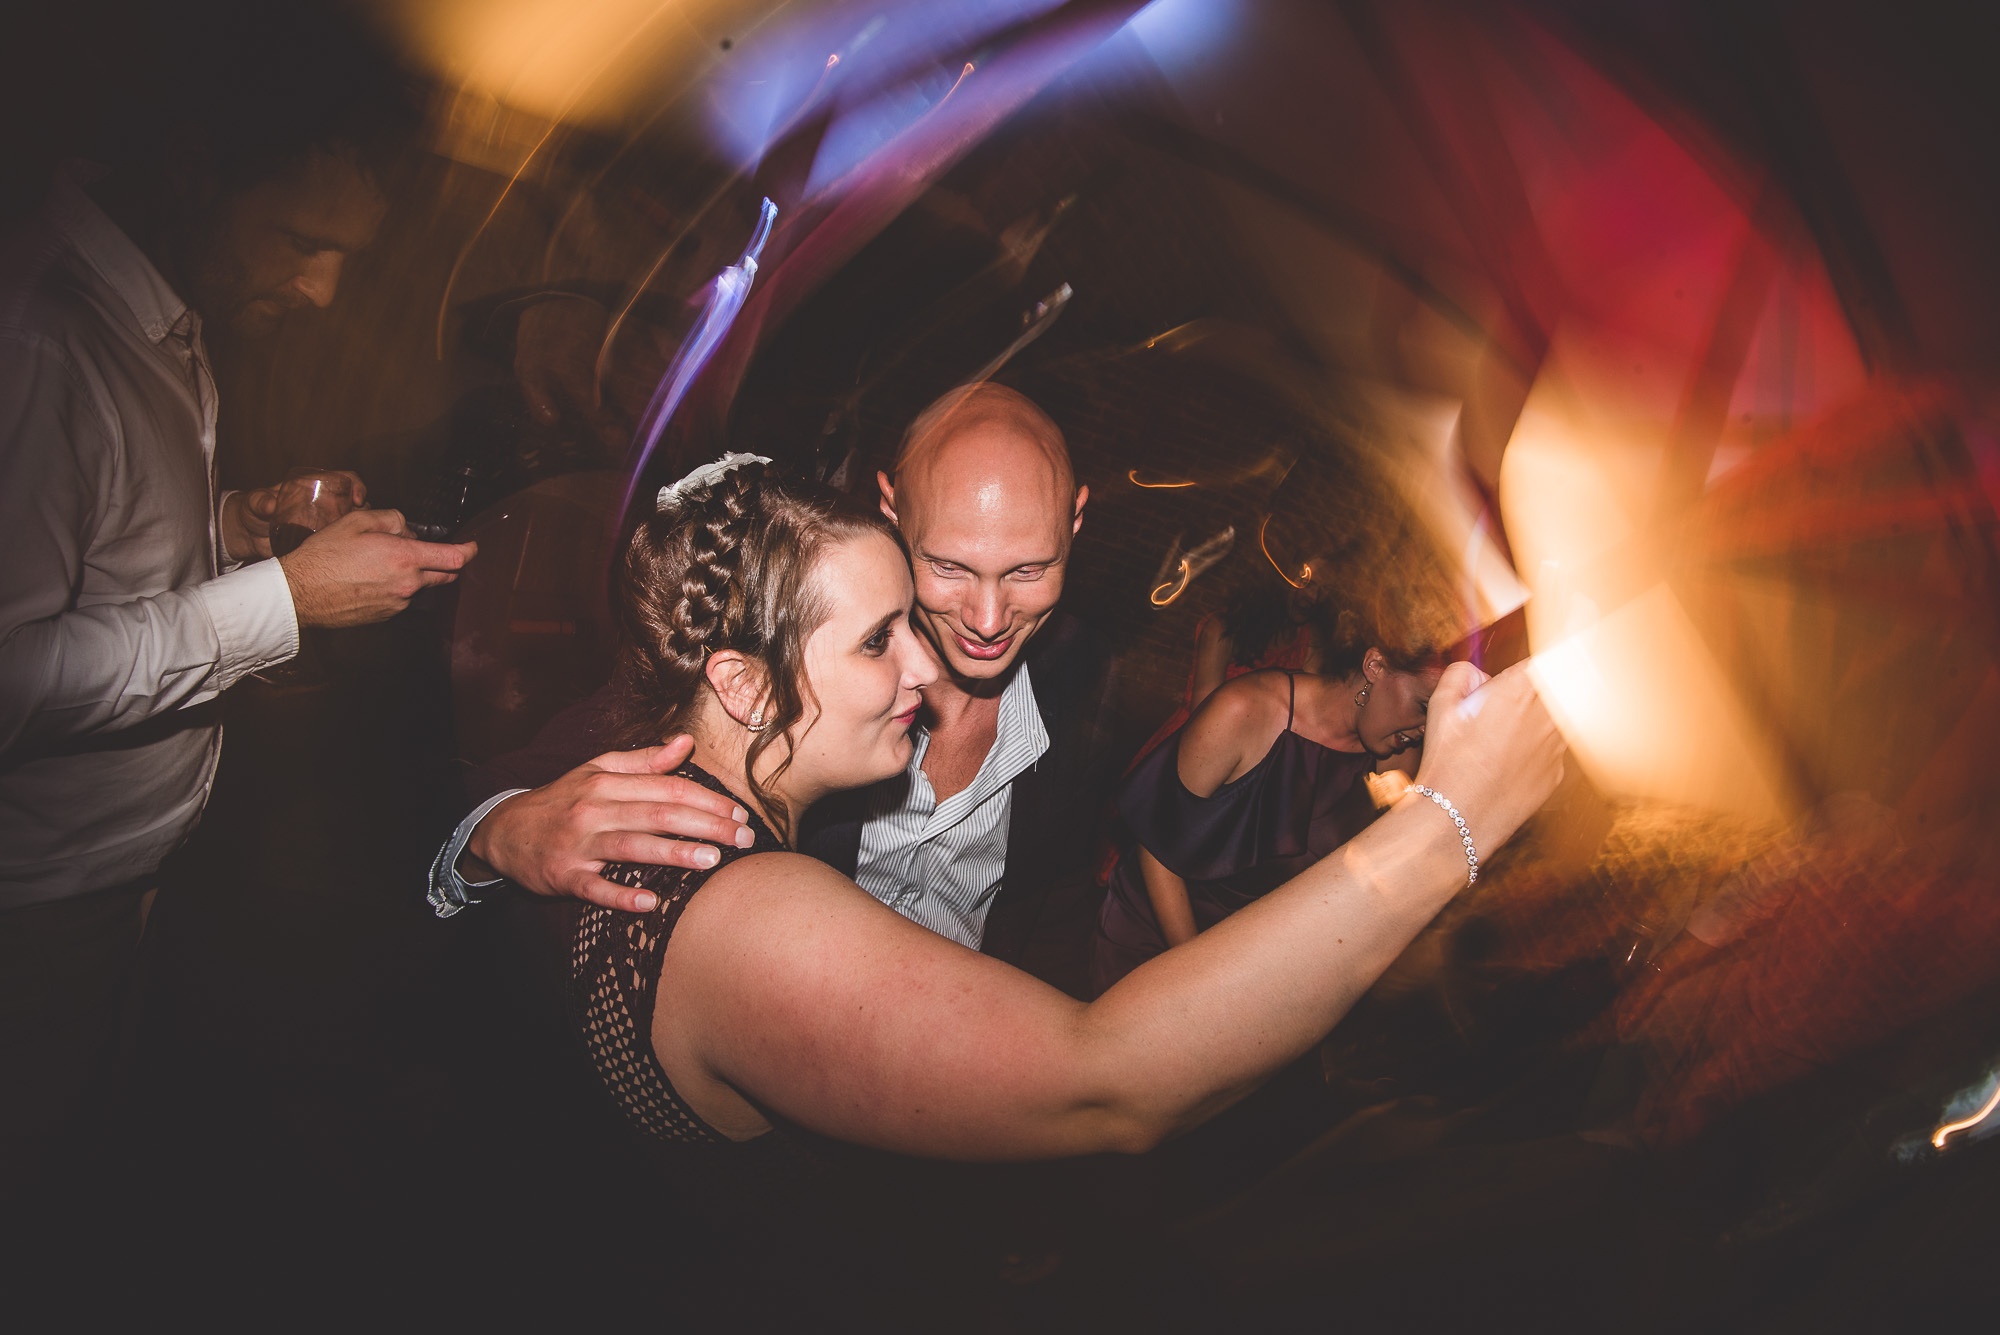 A bride and groom dancing at their wedding party.